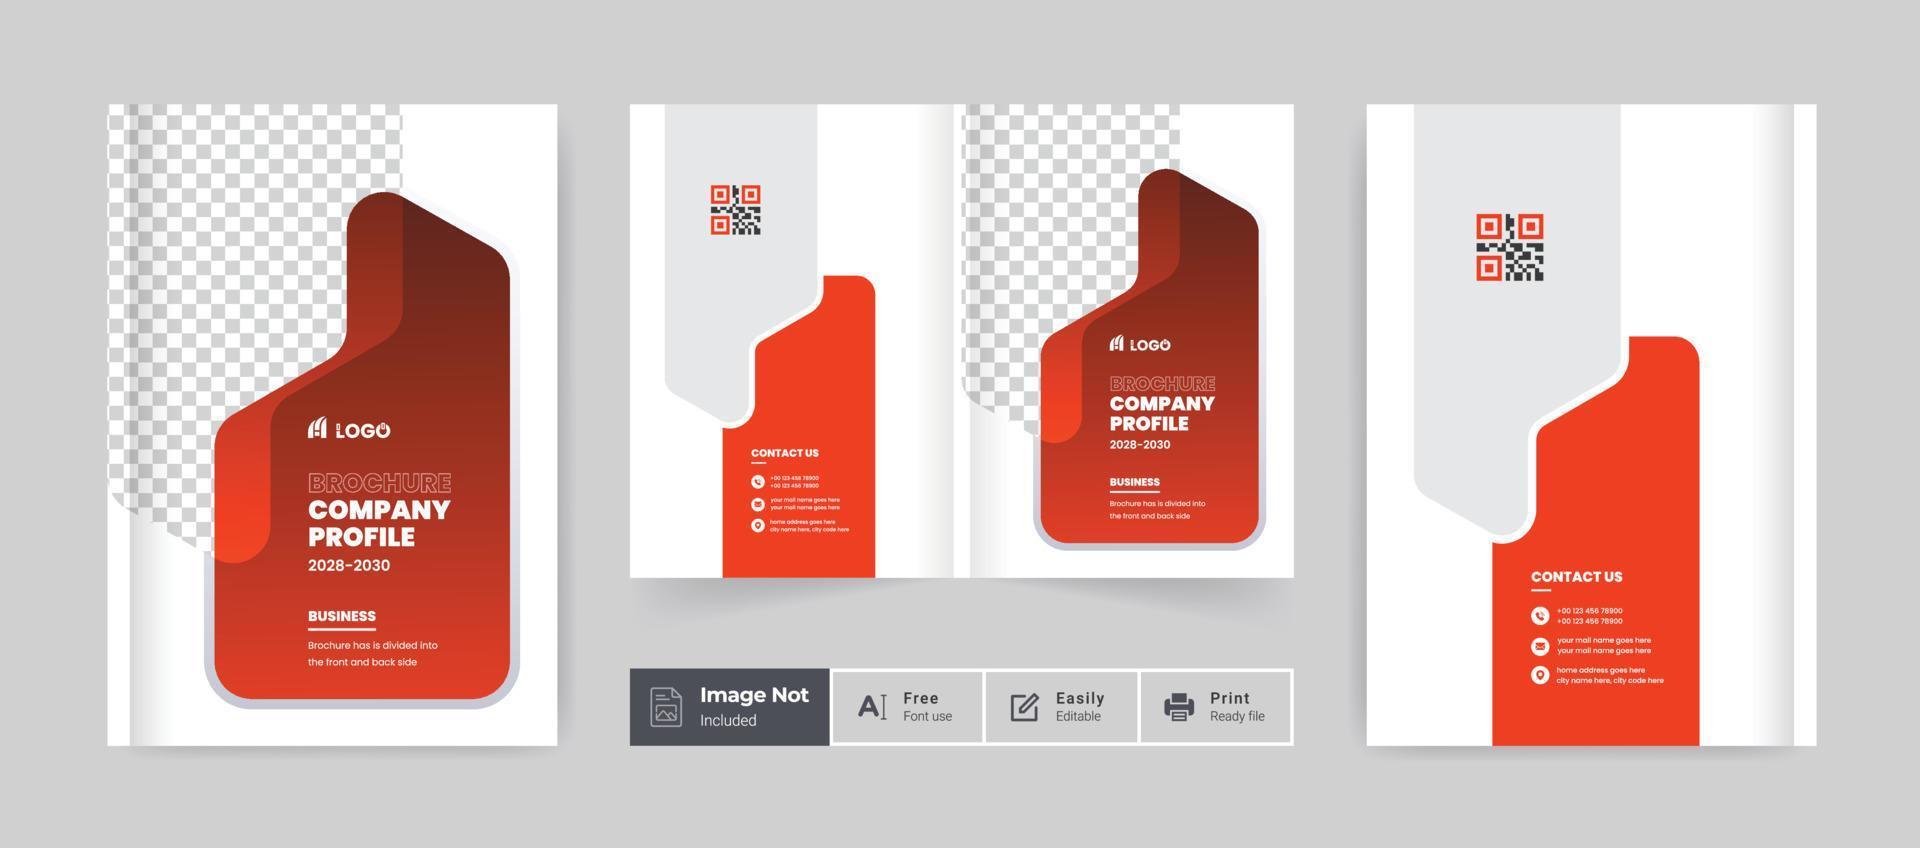 Professional corporate abstract brochure cover page annual report book cover business profile design template elegant modern layout vector